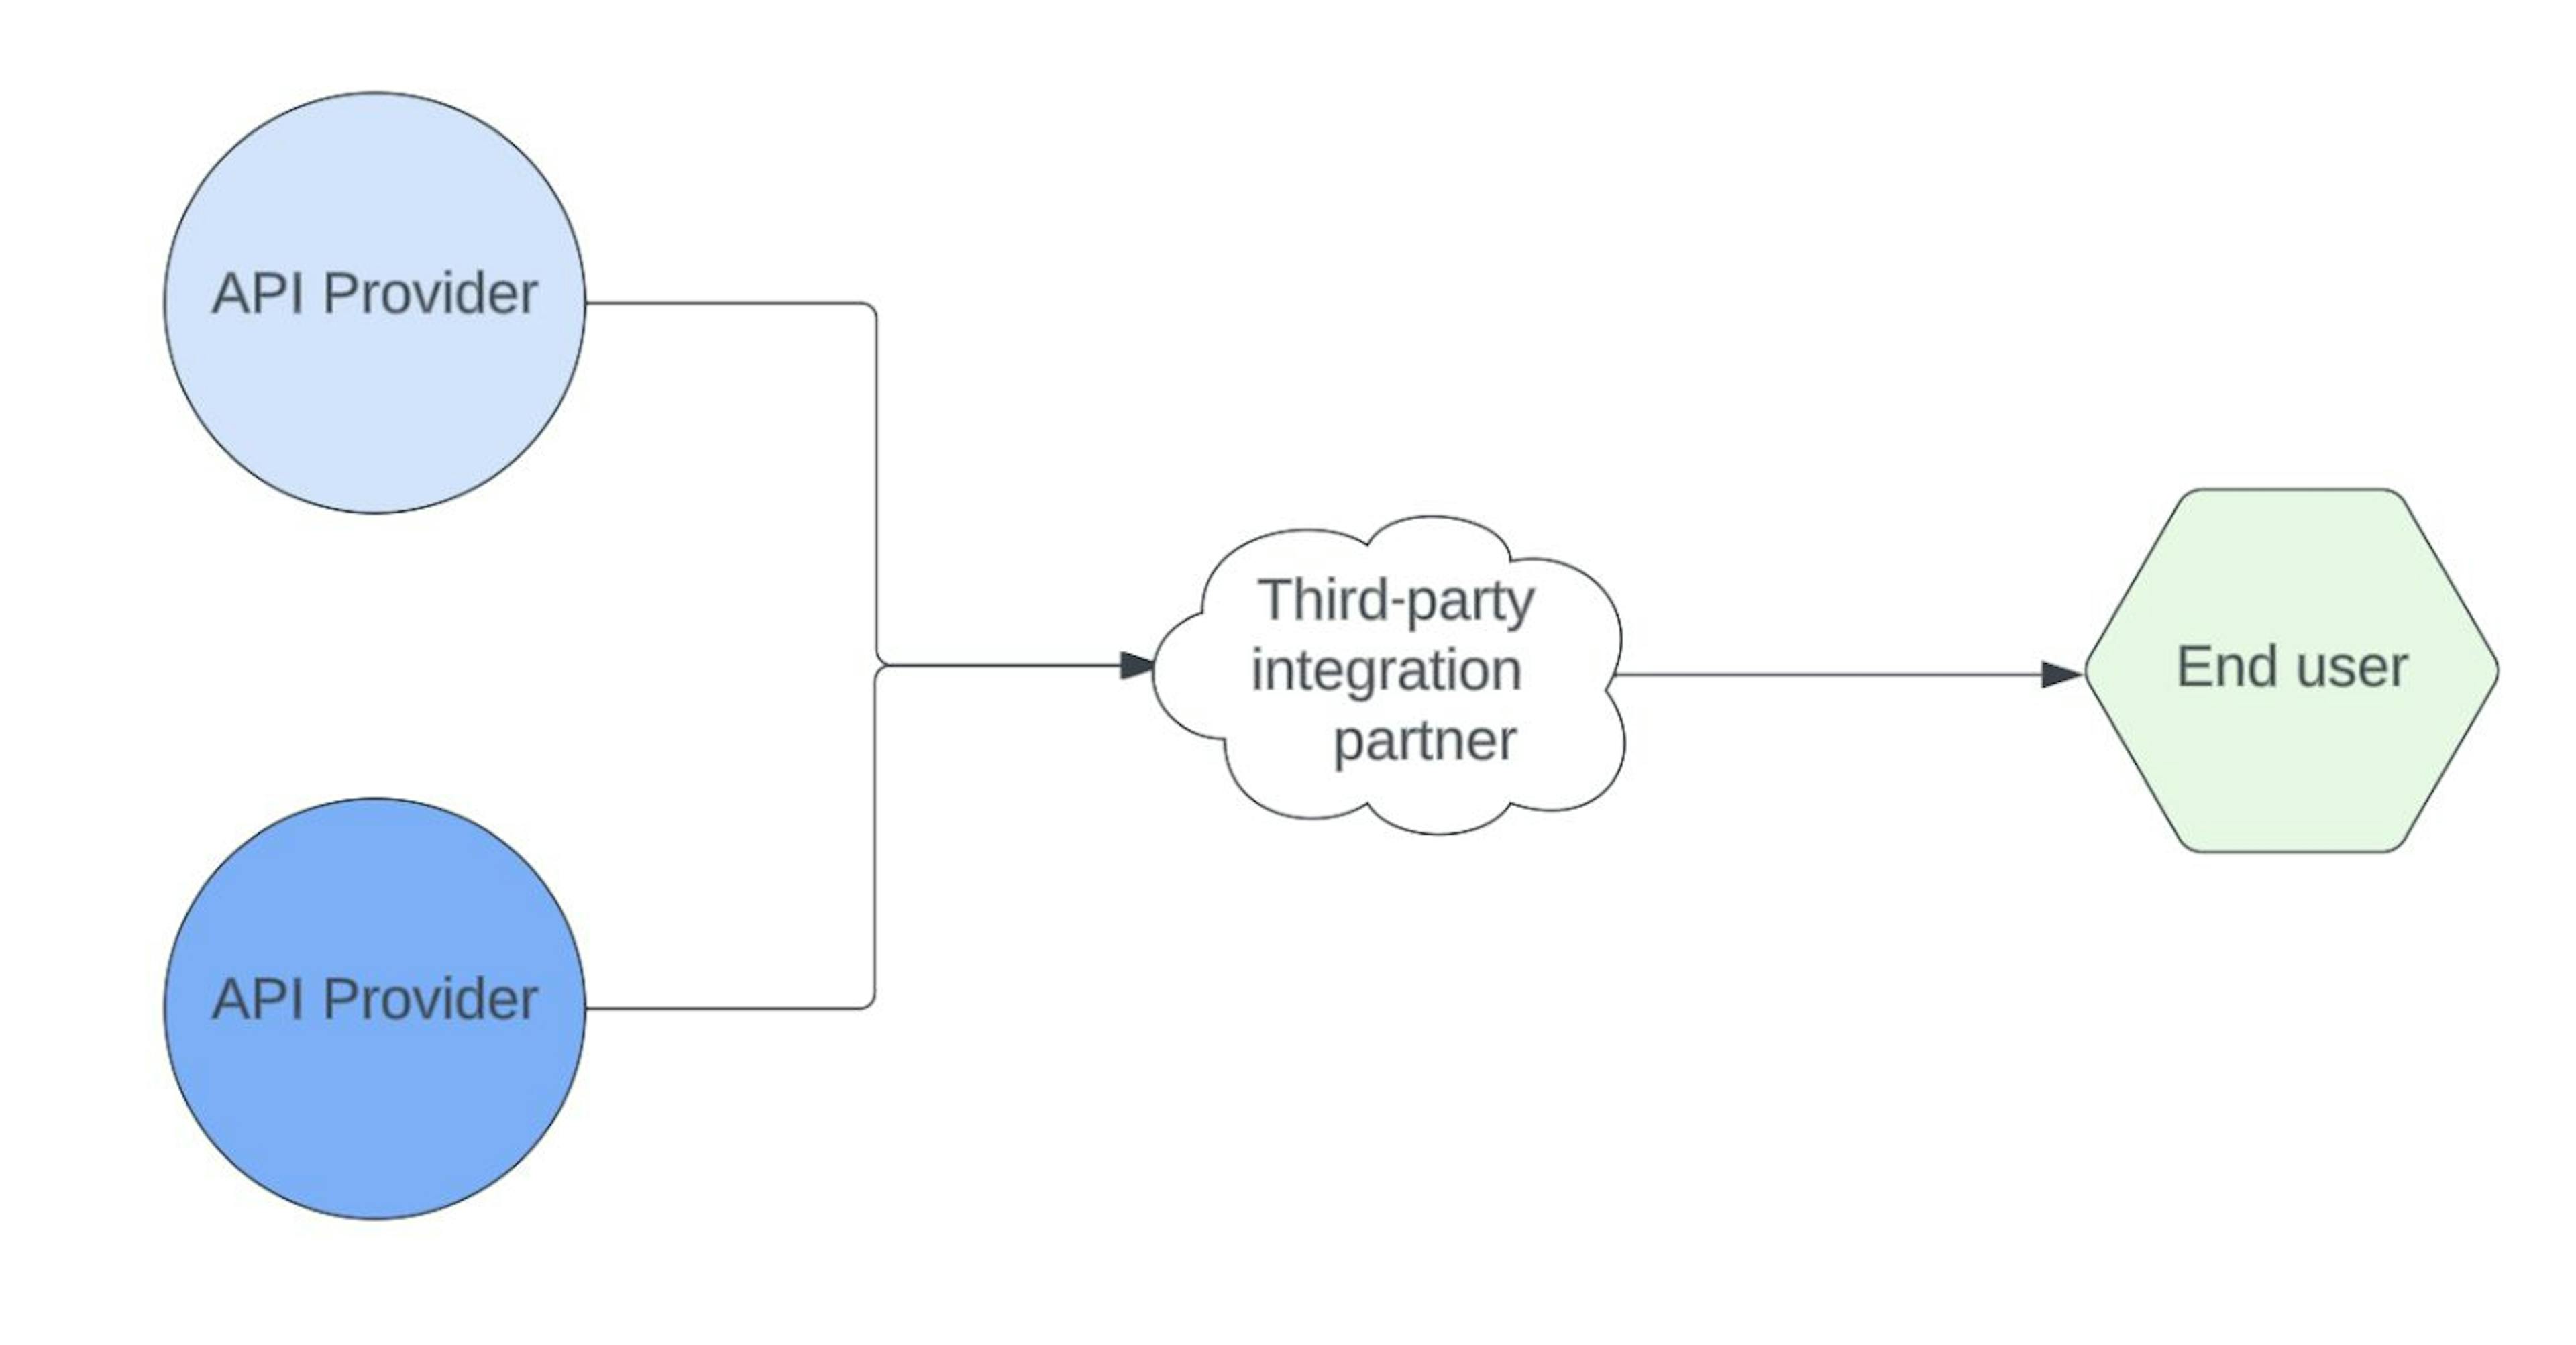 Proper integration mapping is critical for successful and consistent data transfers